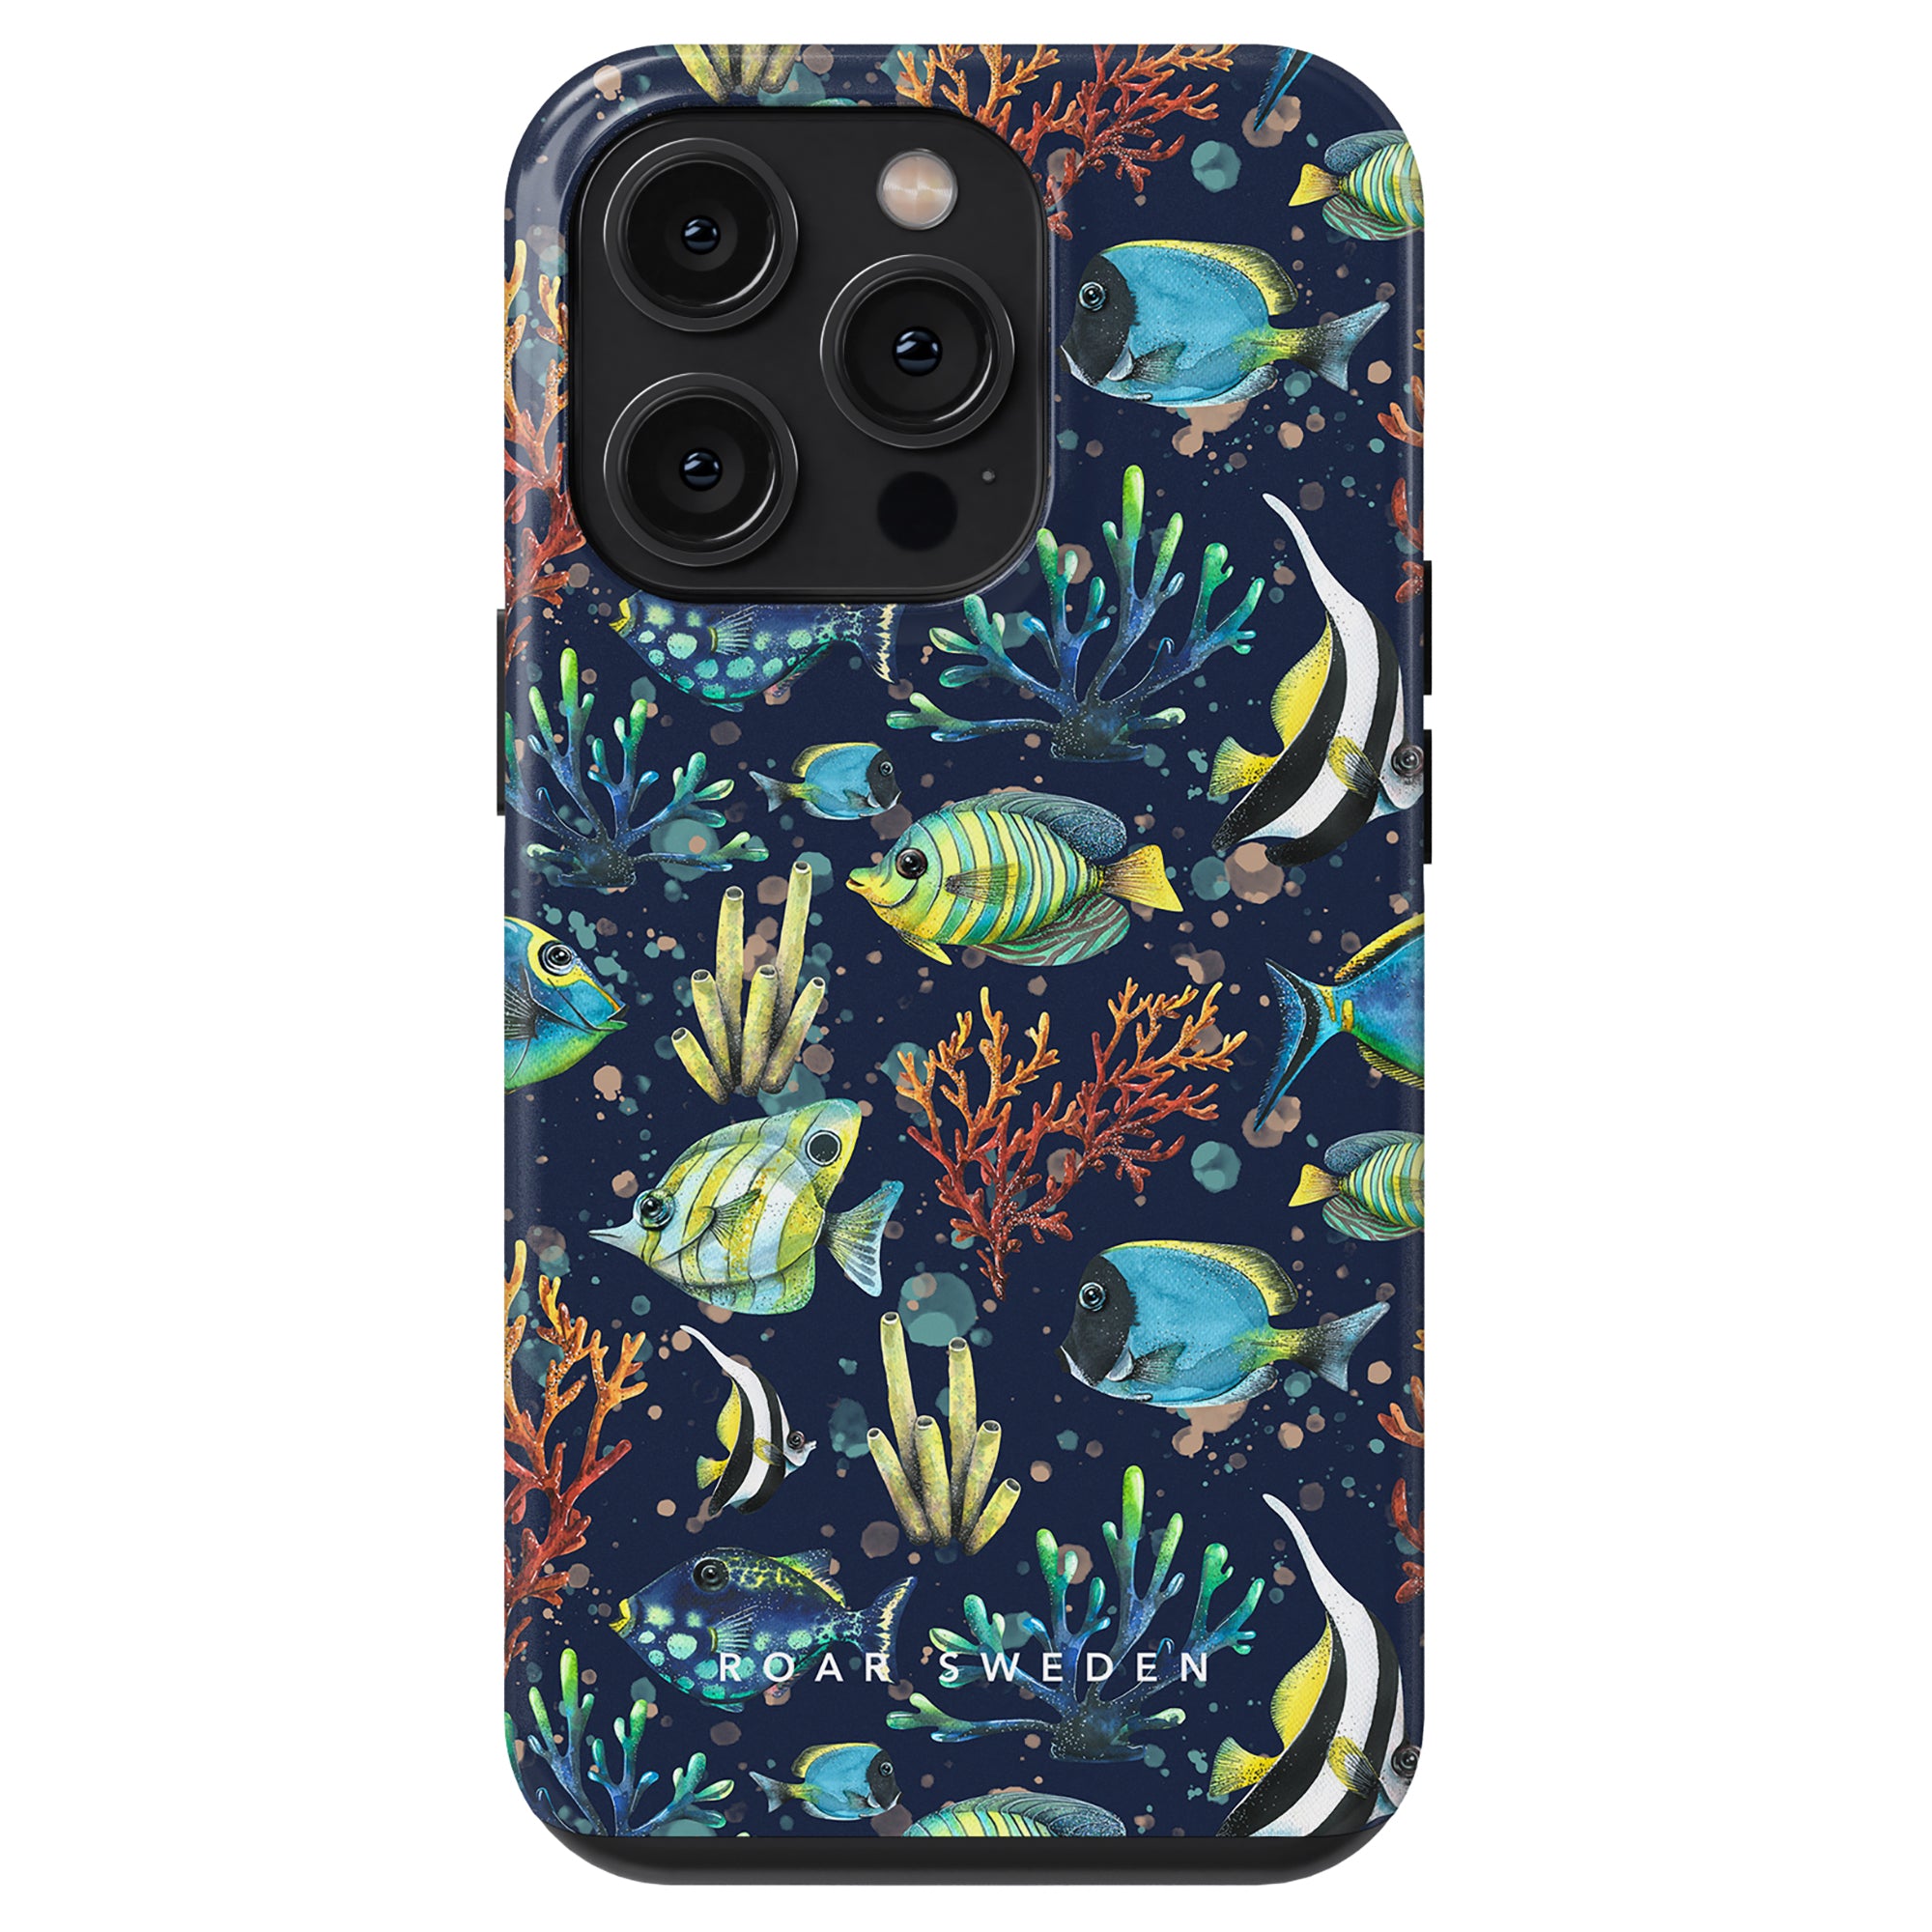 A tough case with an underwater sea life design featuring colorful Tropical Fish and coral.